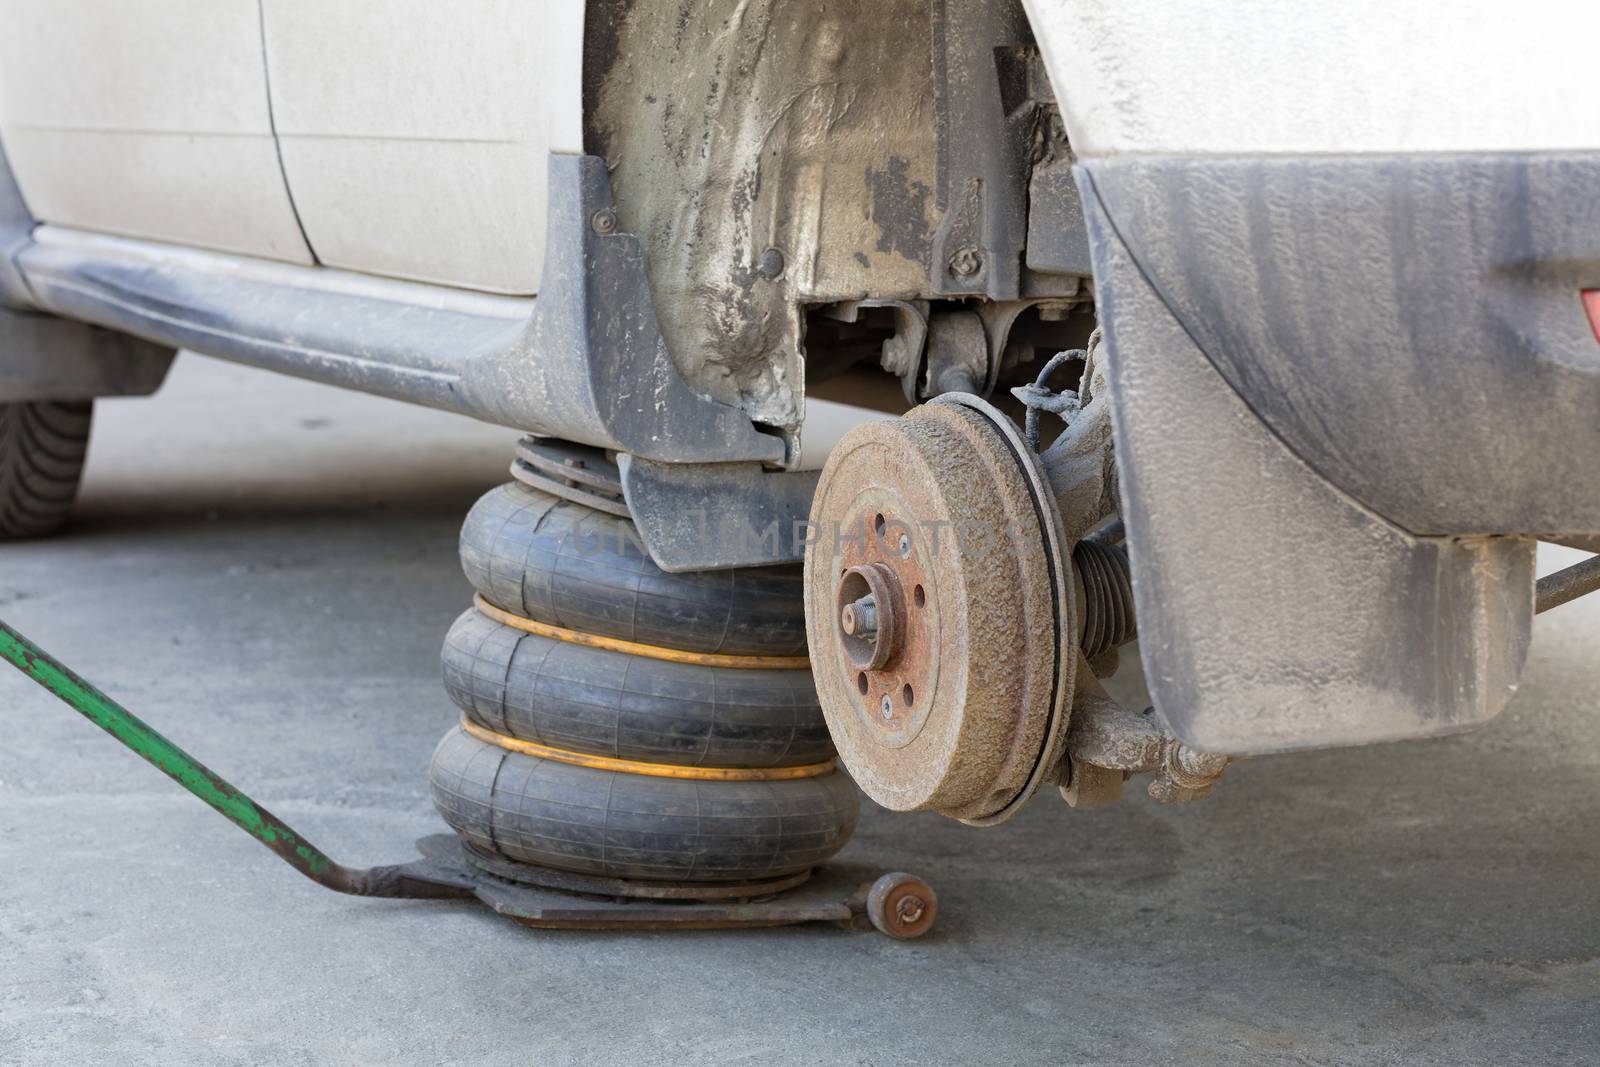 Worn disc brake on the car, as the new tire is replaced. Repair of automobile brakes in a car-care center.